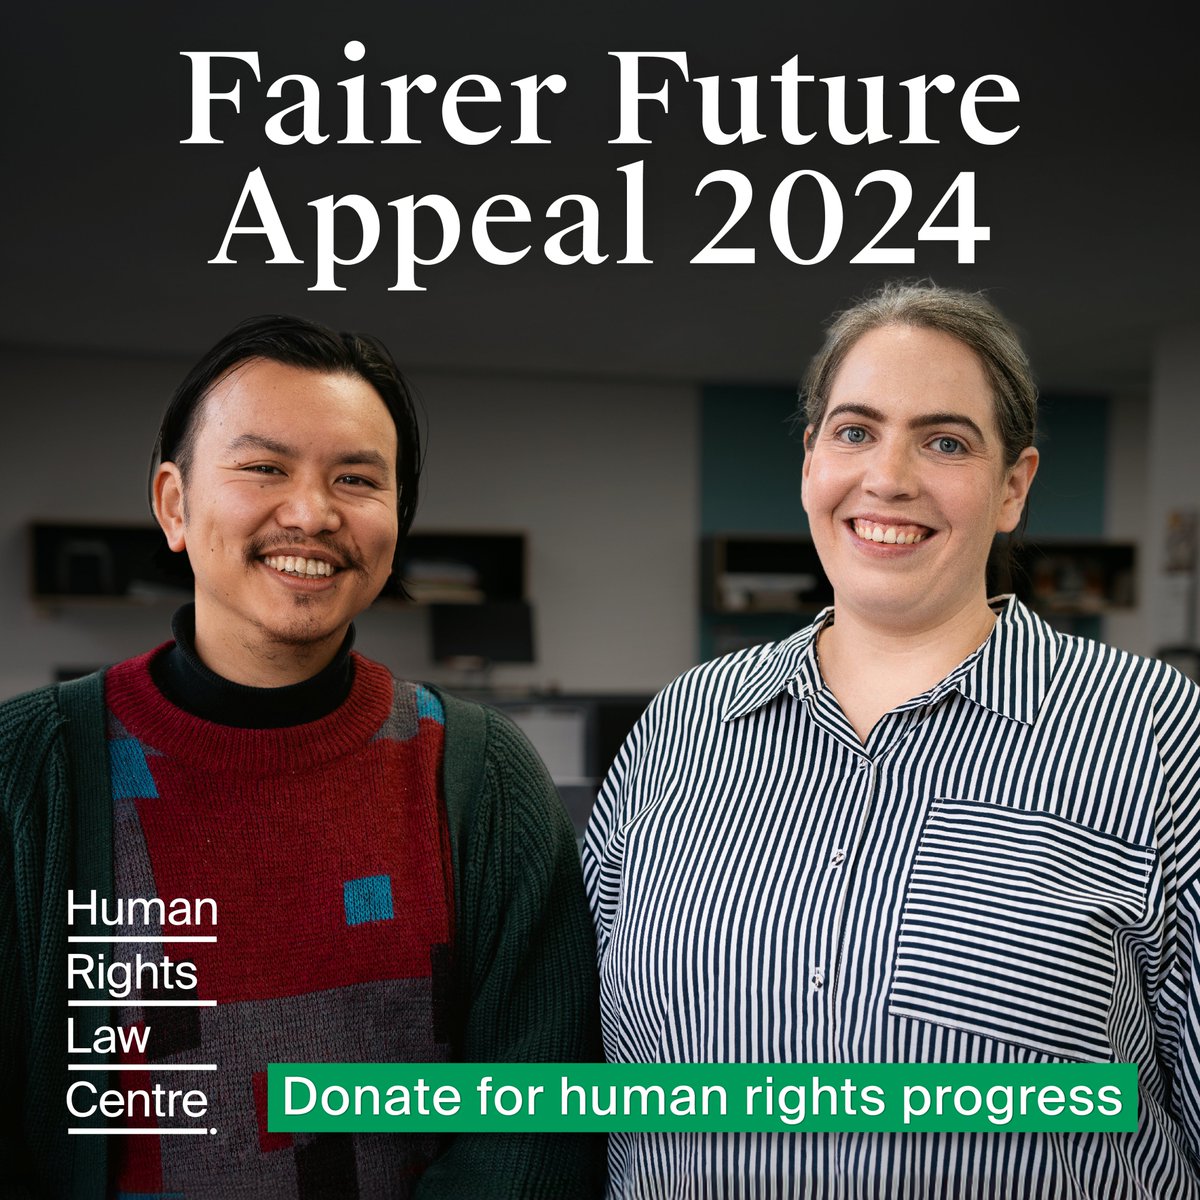 From standing up to #ProtectProtest, to fighting attacks on migrant and refugee communities, to defending whistleblowers, we need to sustain the fight for human rights progress. This year we want to raise $200,000 for our Fairer Future Appeal. Donate now: support.hrlc.org.au/2024-appeal